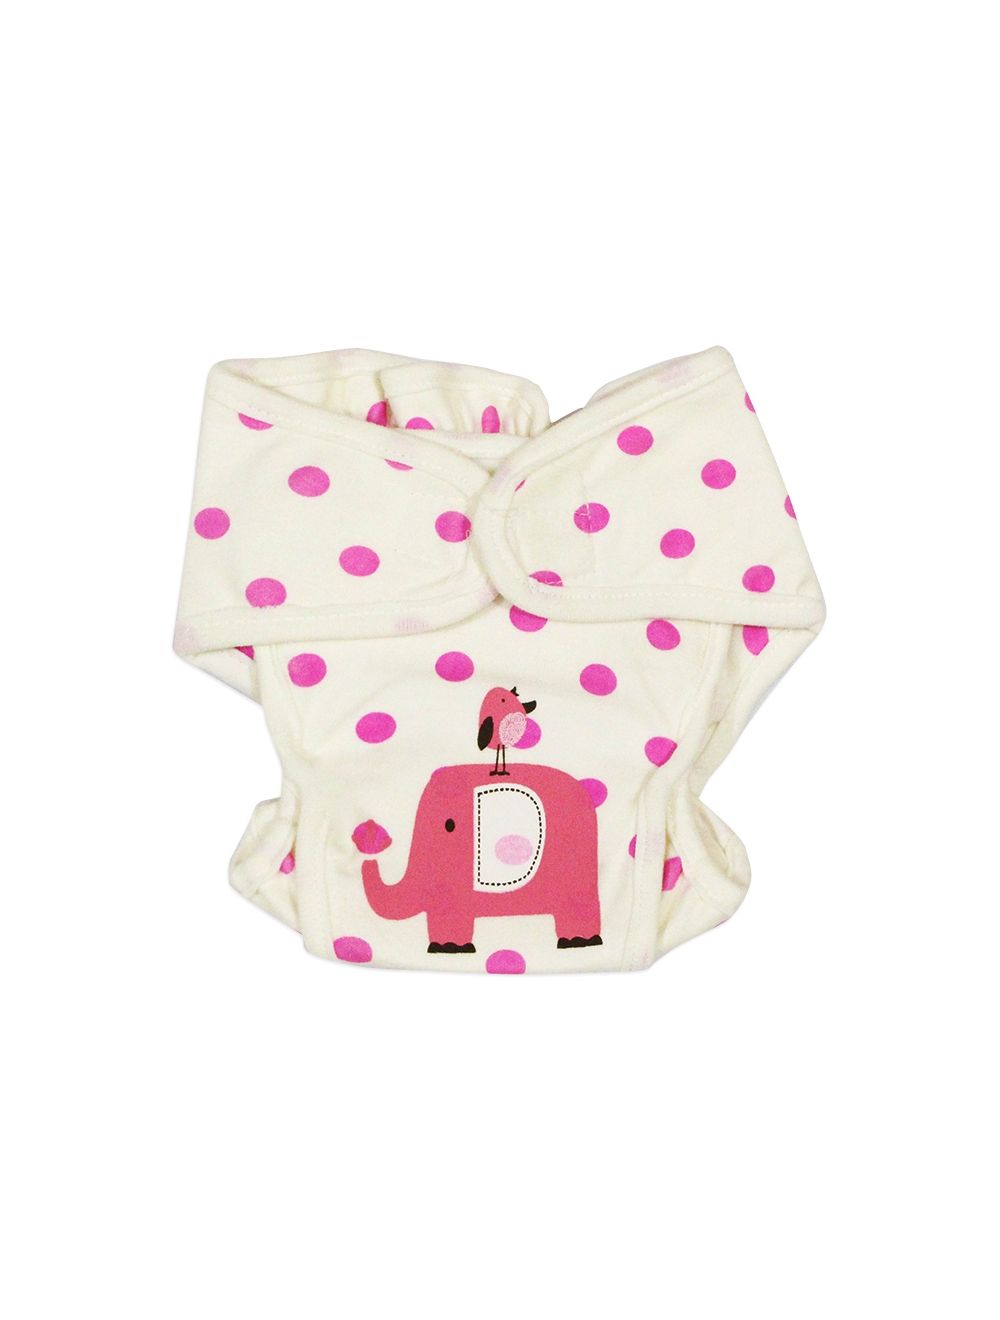 Careone Adjustable Baby Reuseable Nappy Elephant Pink